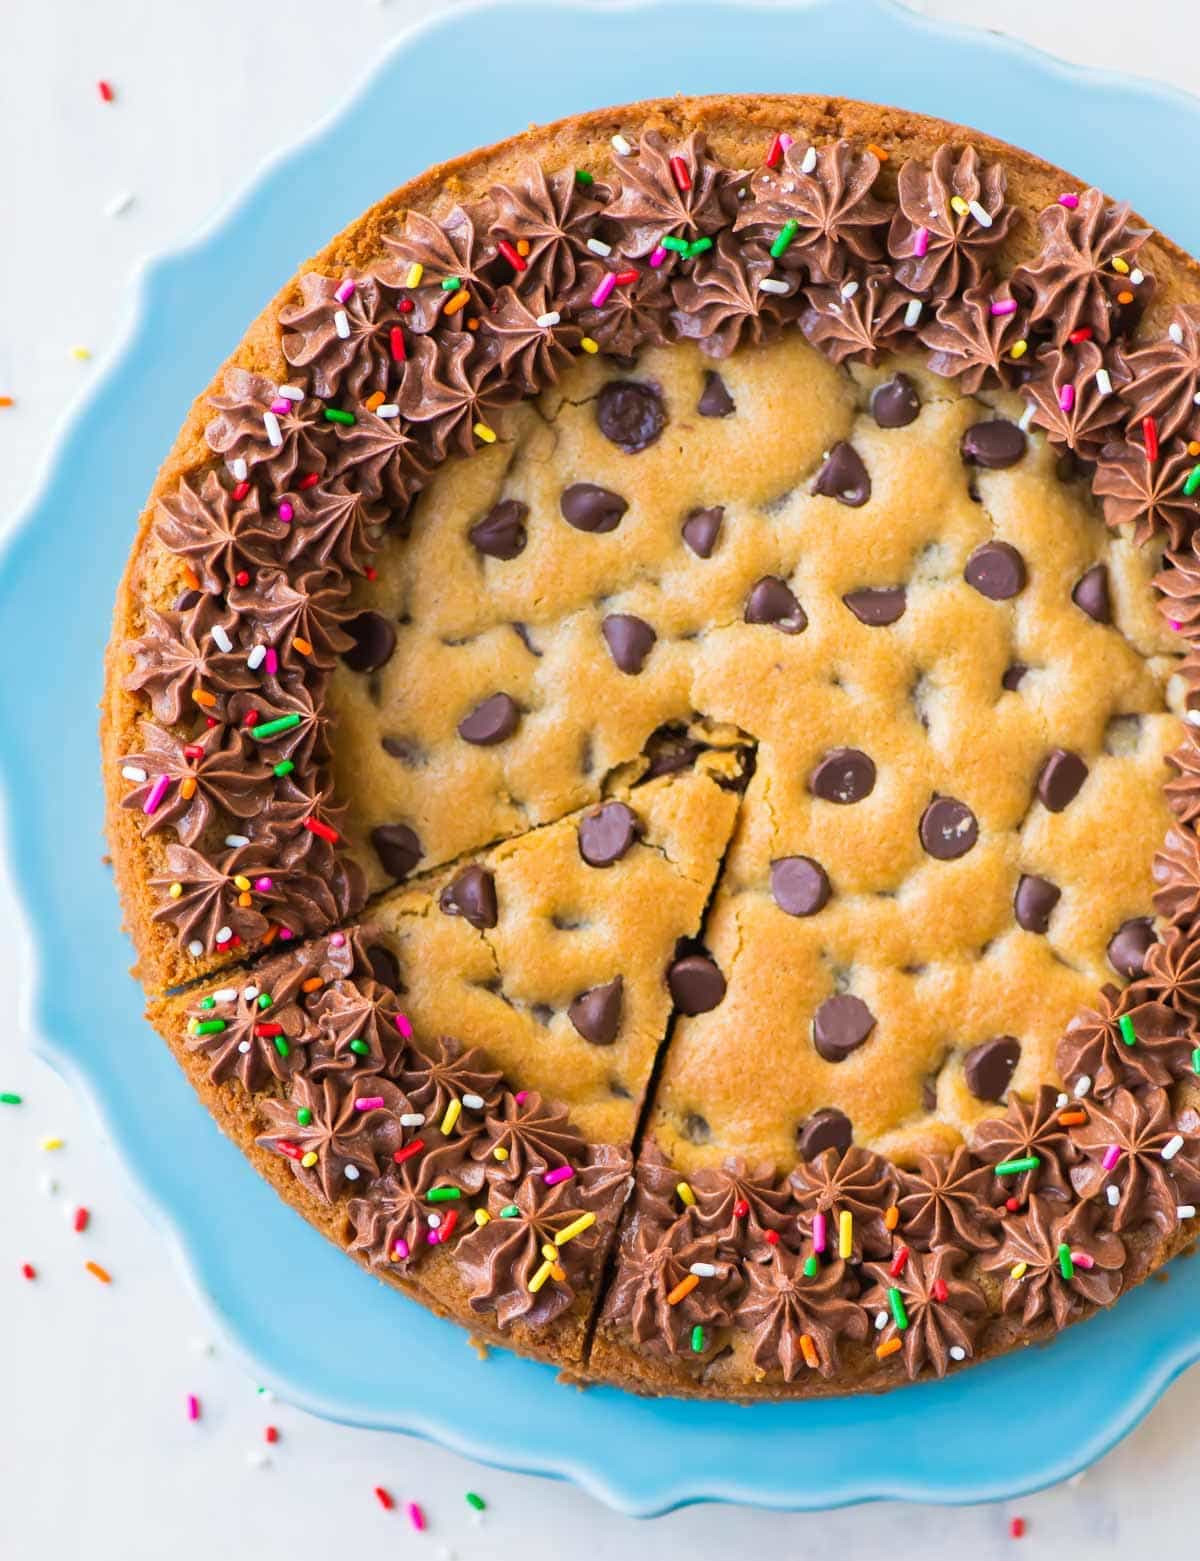 Birthday Cake Cookie Recipe
 Cookie Cake Easy Recipe from Scratch WellPlated